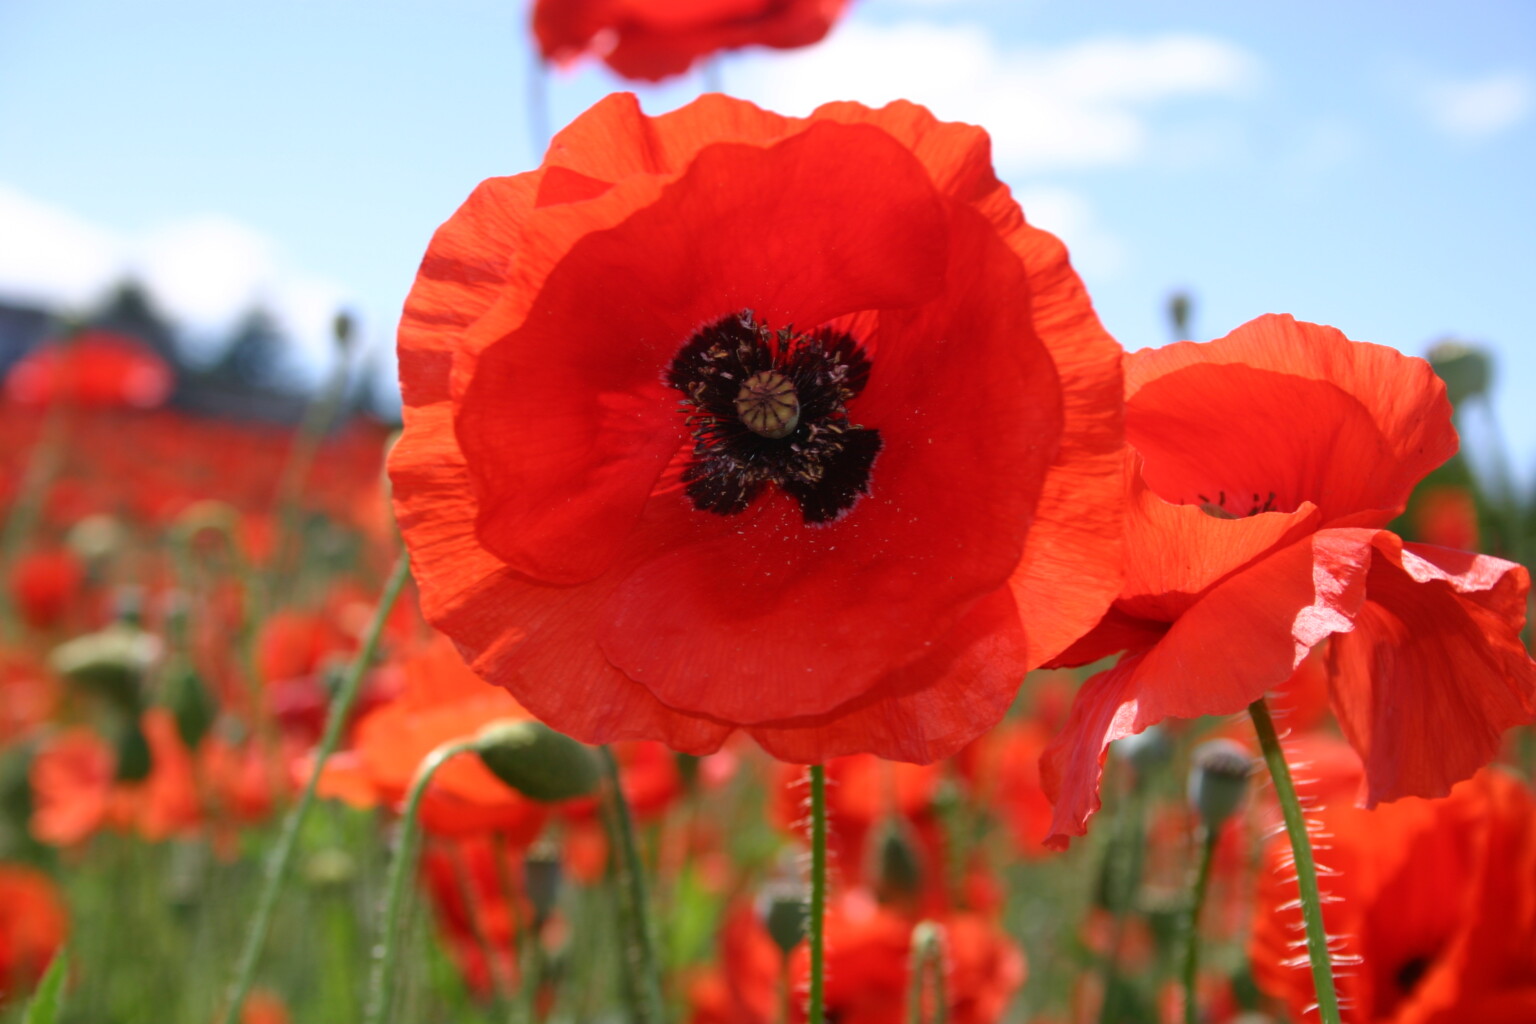 Poppy Flower — Facts, Symbolism, And Gardening Tips - Farmers' Almanac